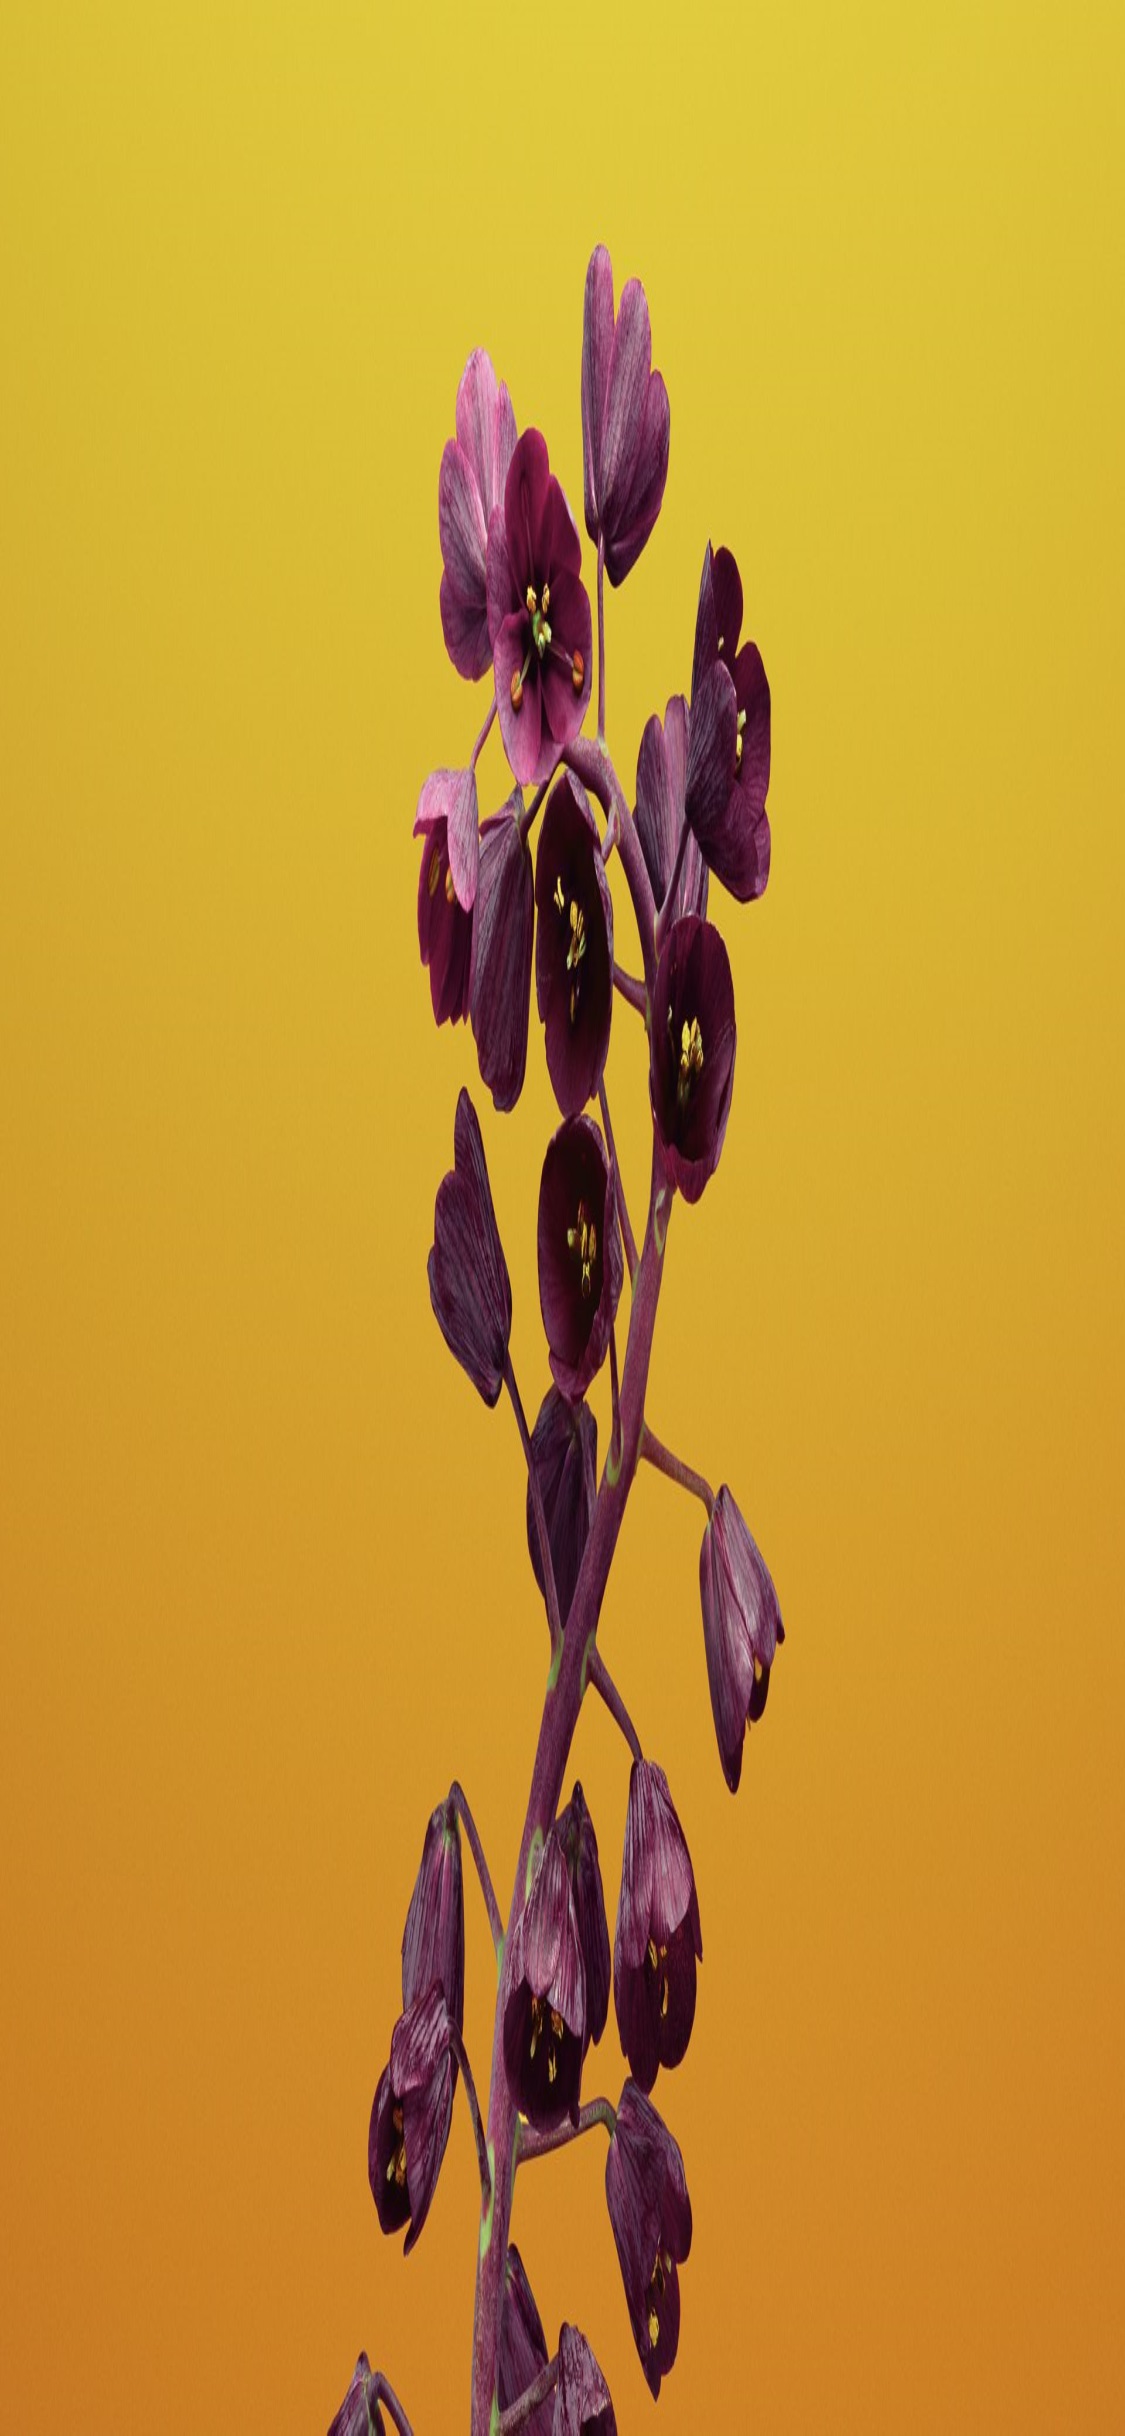 Flower Wallpaper For Iphone - Moth Orchid - HD Wallpaper 